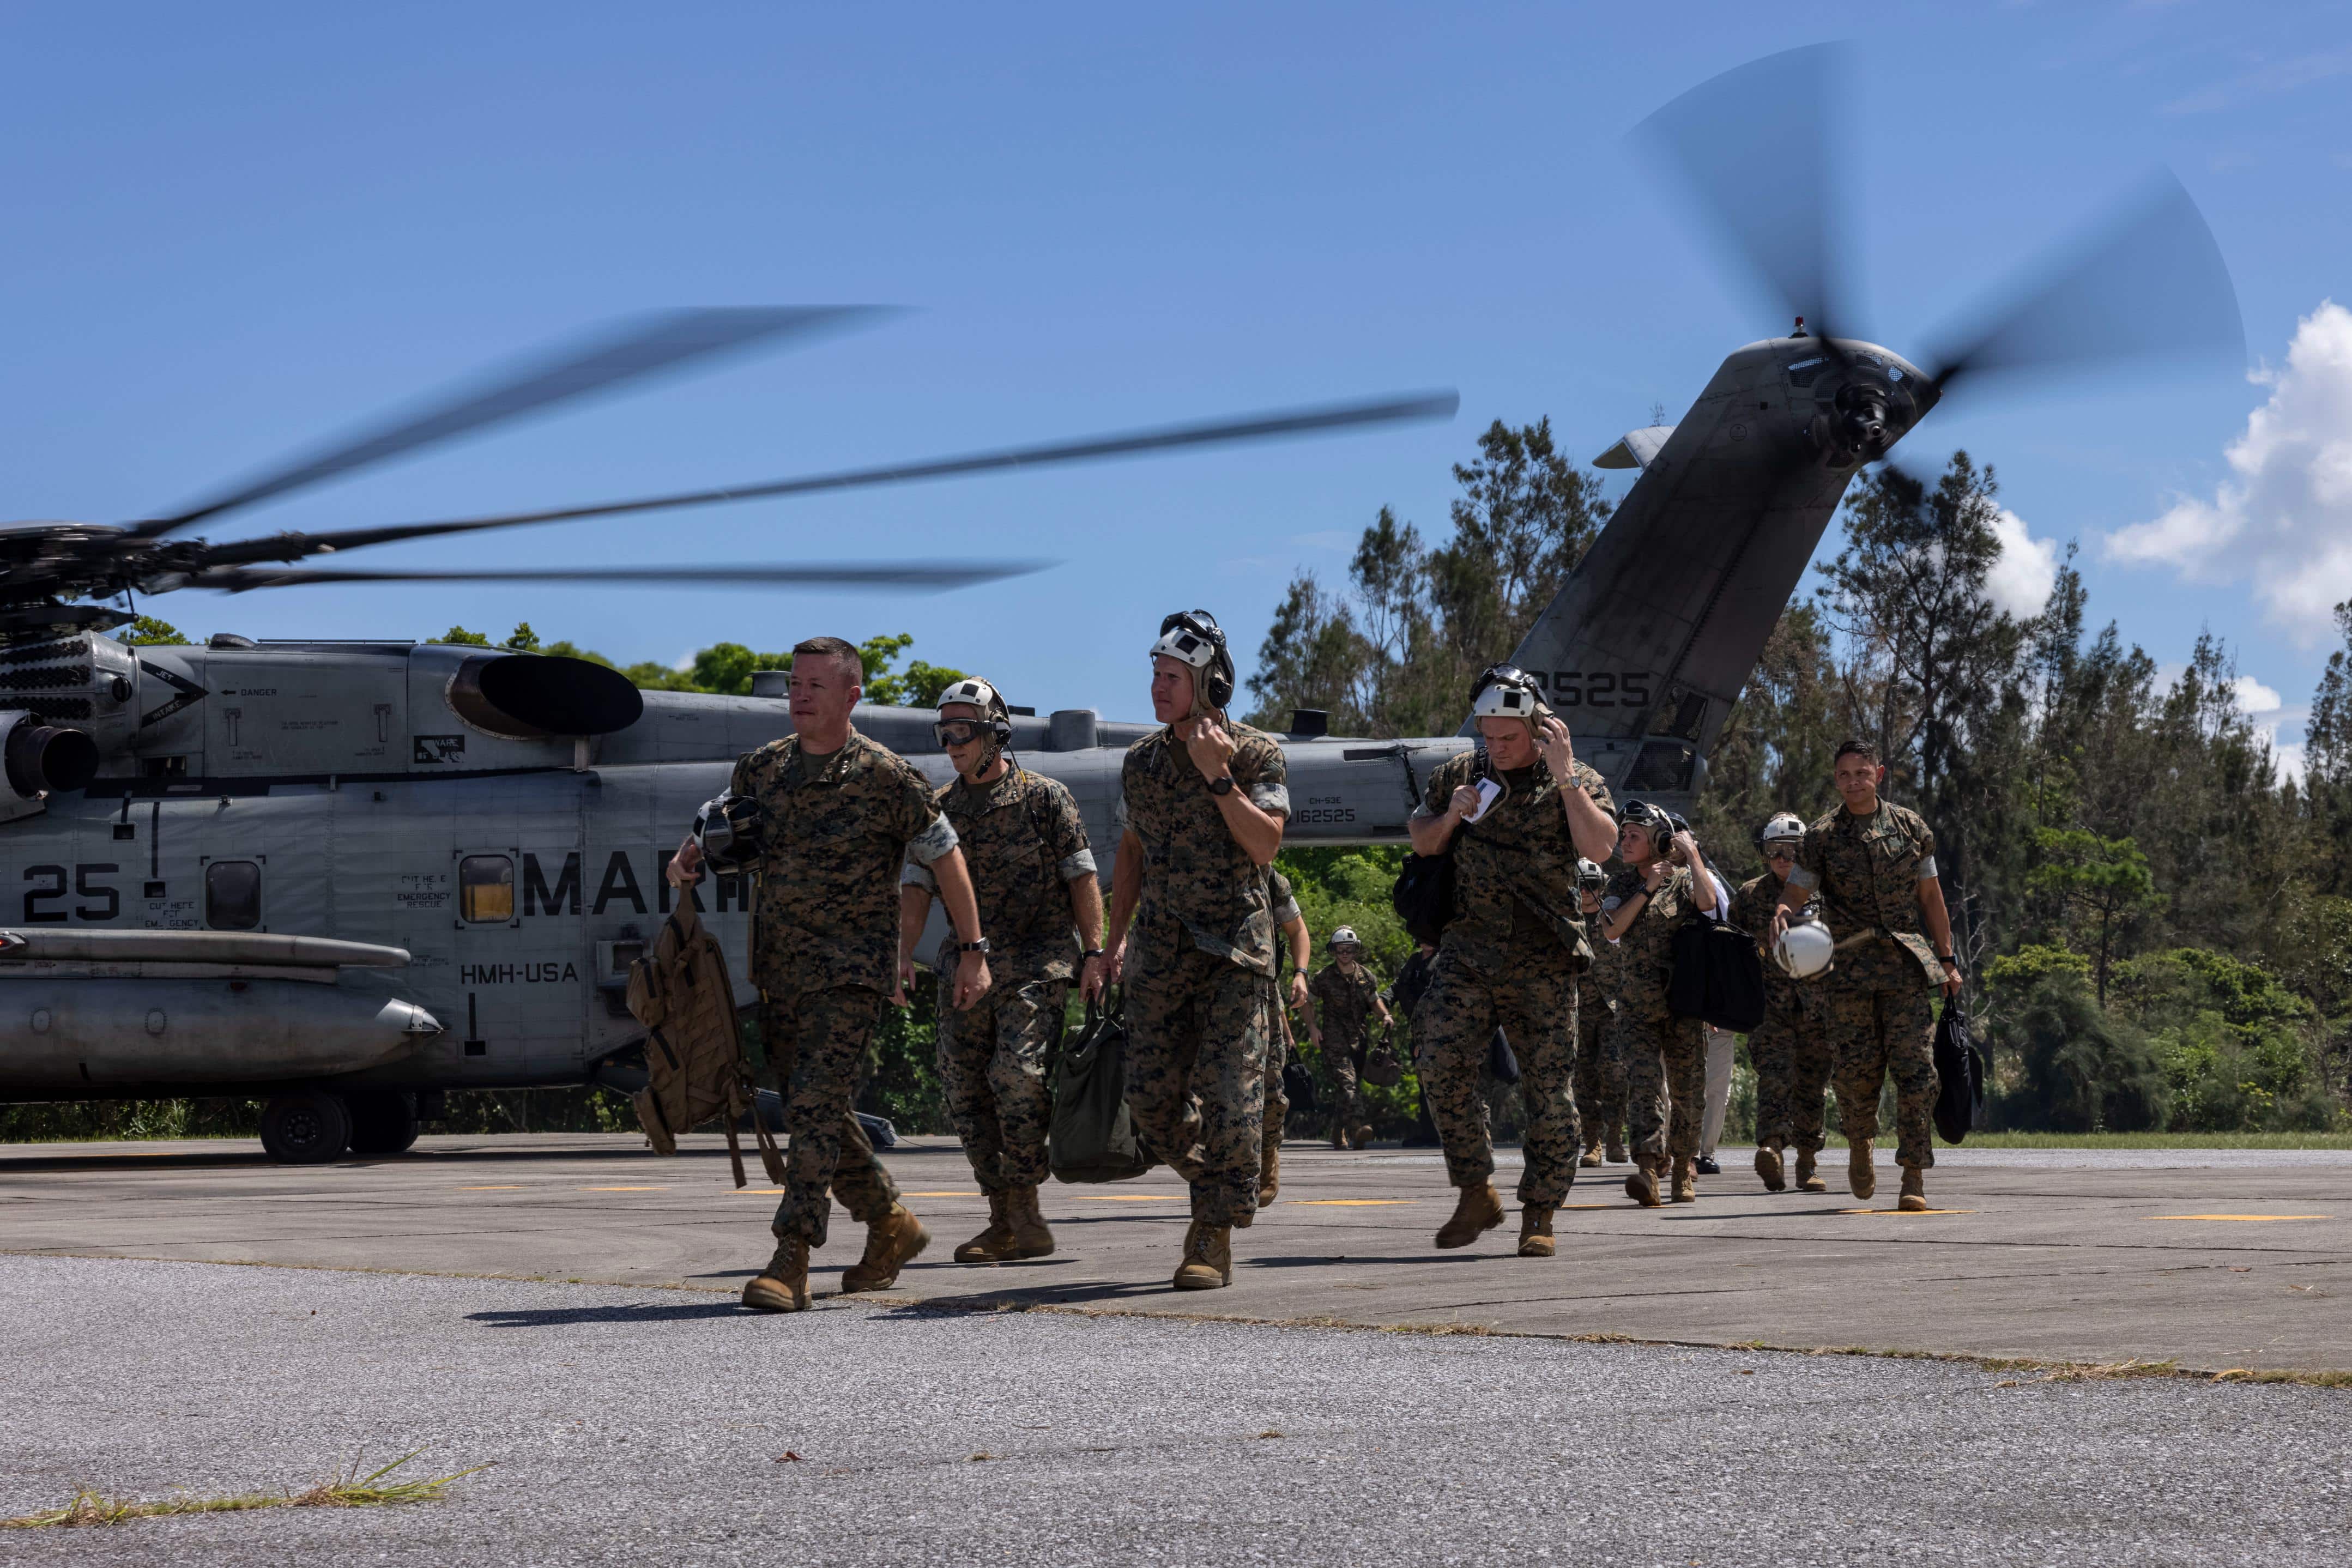 U.S. Marine Corps General Eric M. Smith, the Assistant Commandant of the Marine Corps, and III Marine Expeditionary Force leadership, unload from a CH-53E Super Stallion at Camp Hansen, Okinawa, Japan, Sep. 12, 2023. Smith met with key leaders from the 31st Marine Expeditionary Unit to discuss crisis response capabilities and Marine Corps modernization efforts.